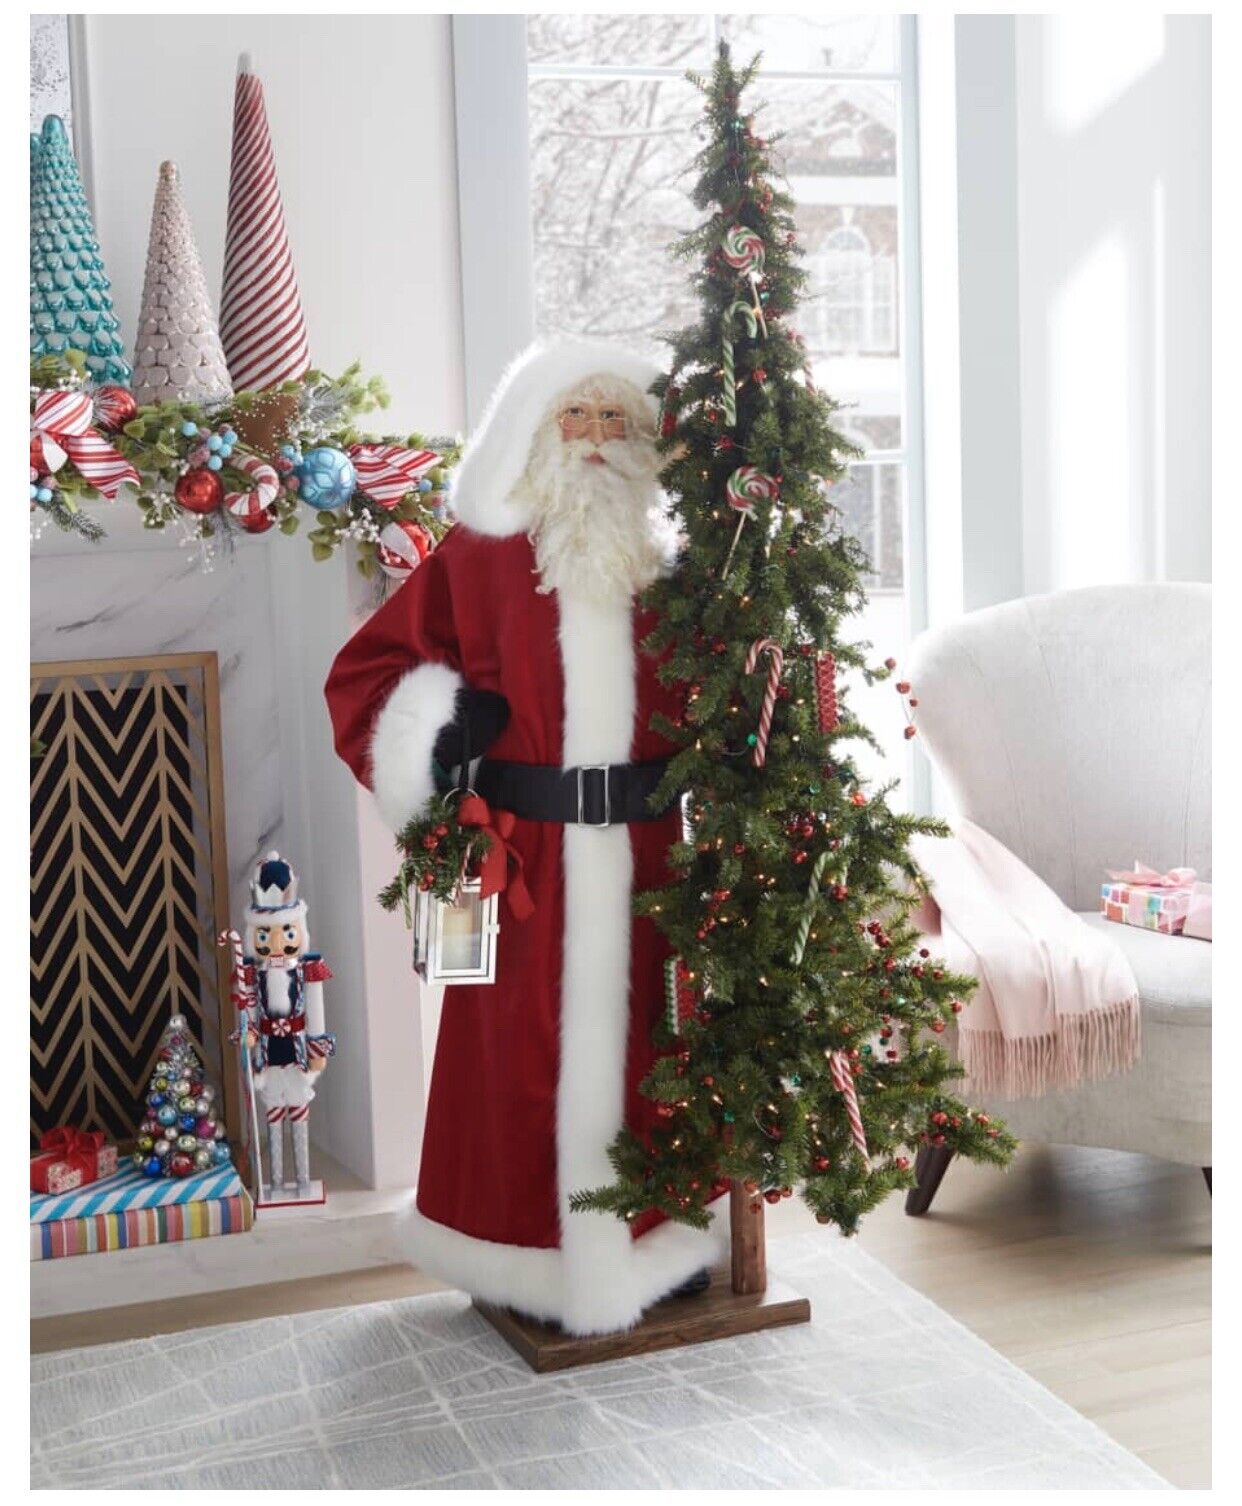 Life Size 57” Santa Claus next to 72” Lighted Candied Christmas Tree